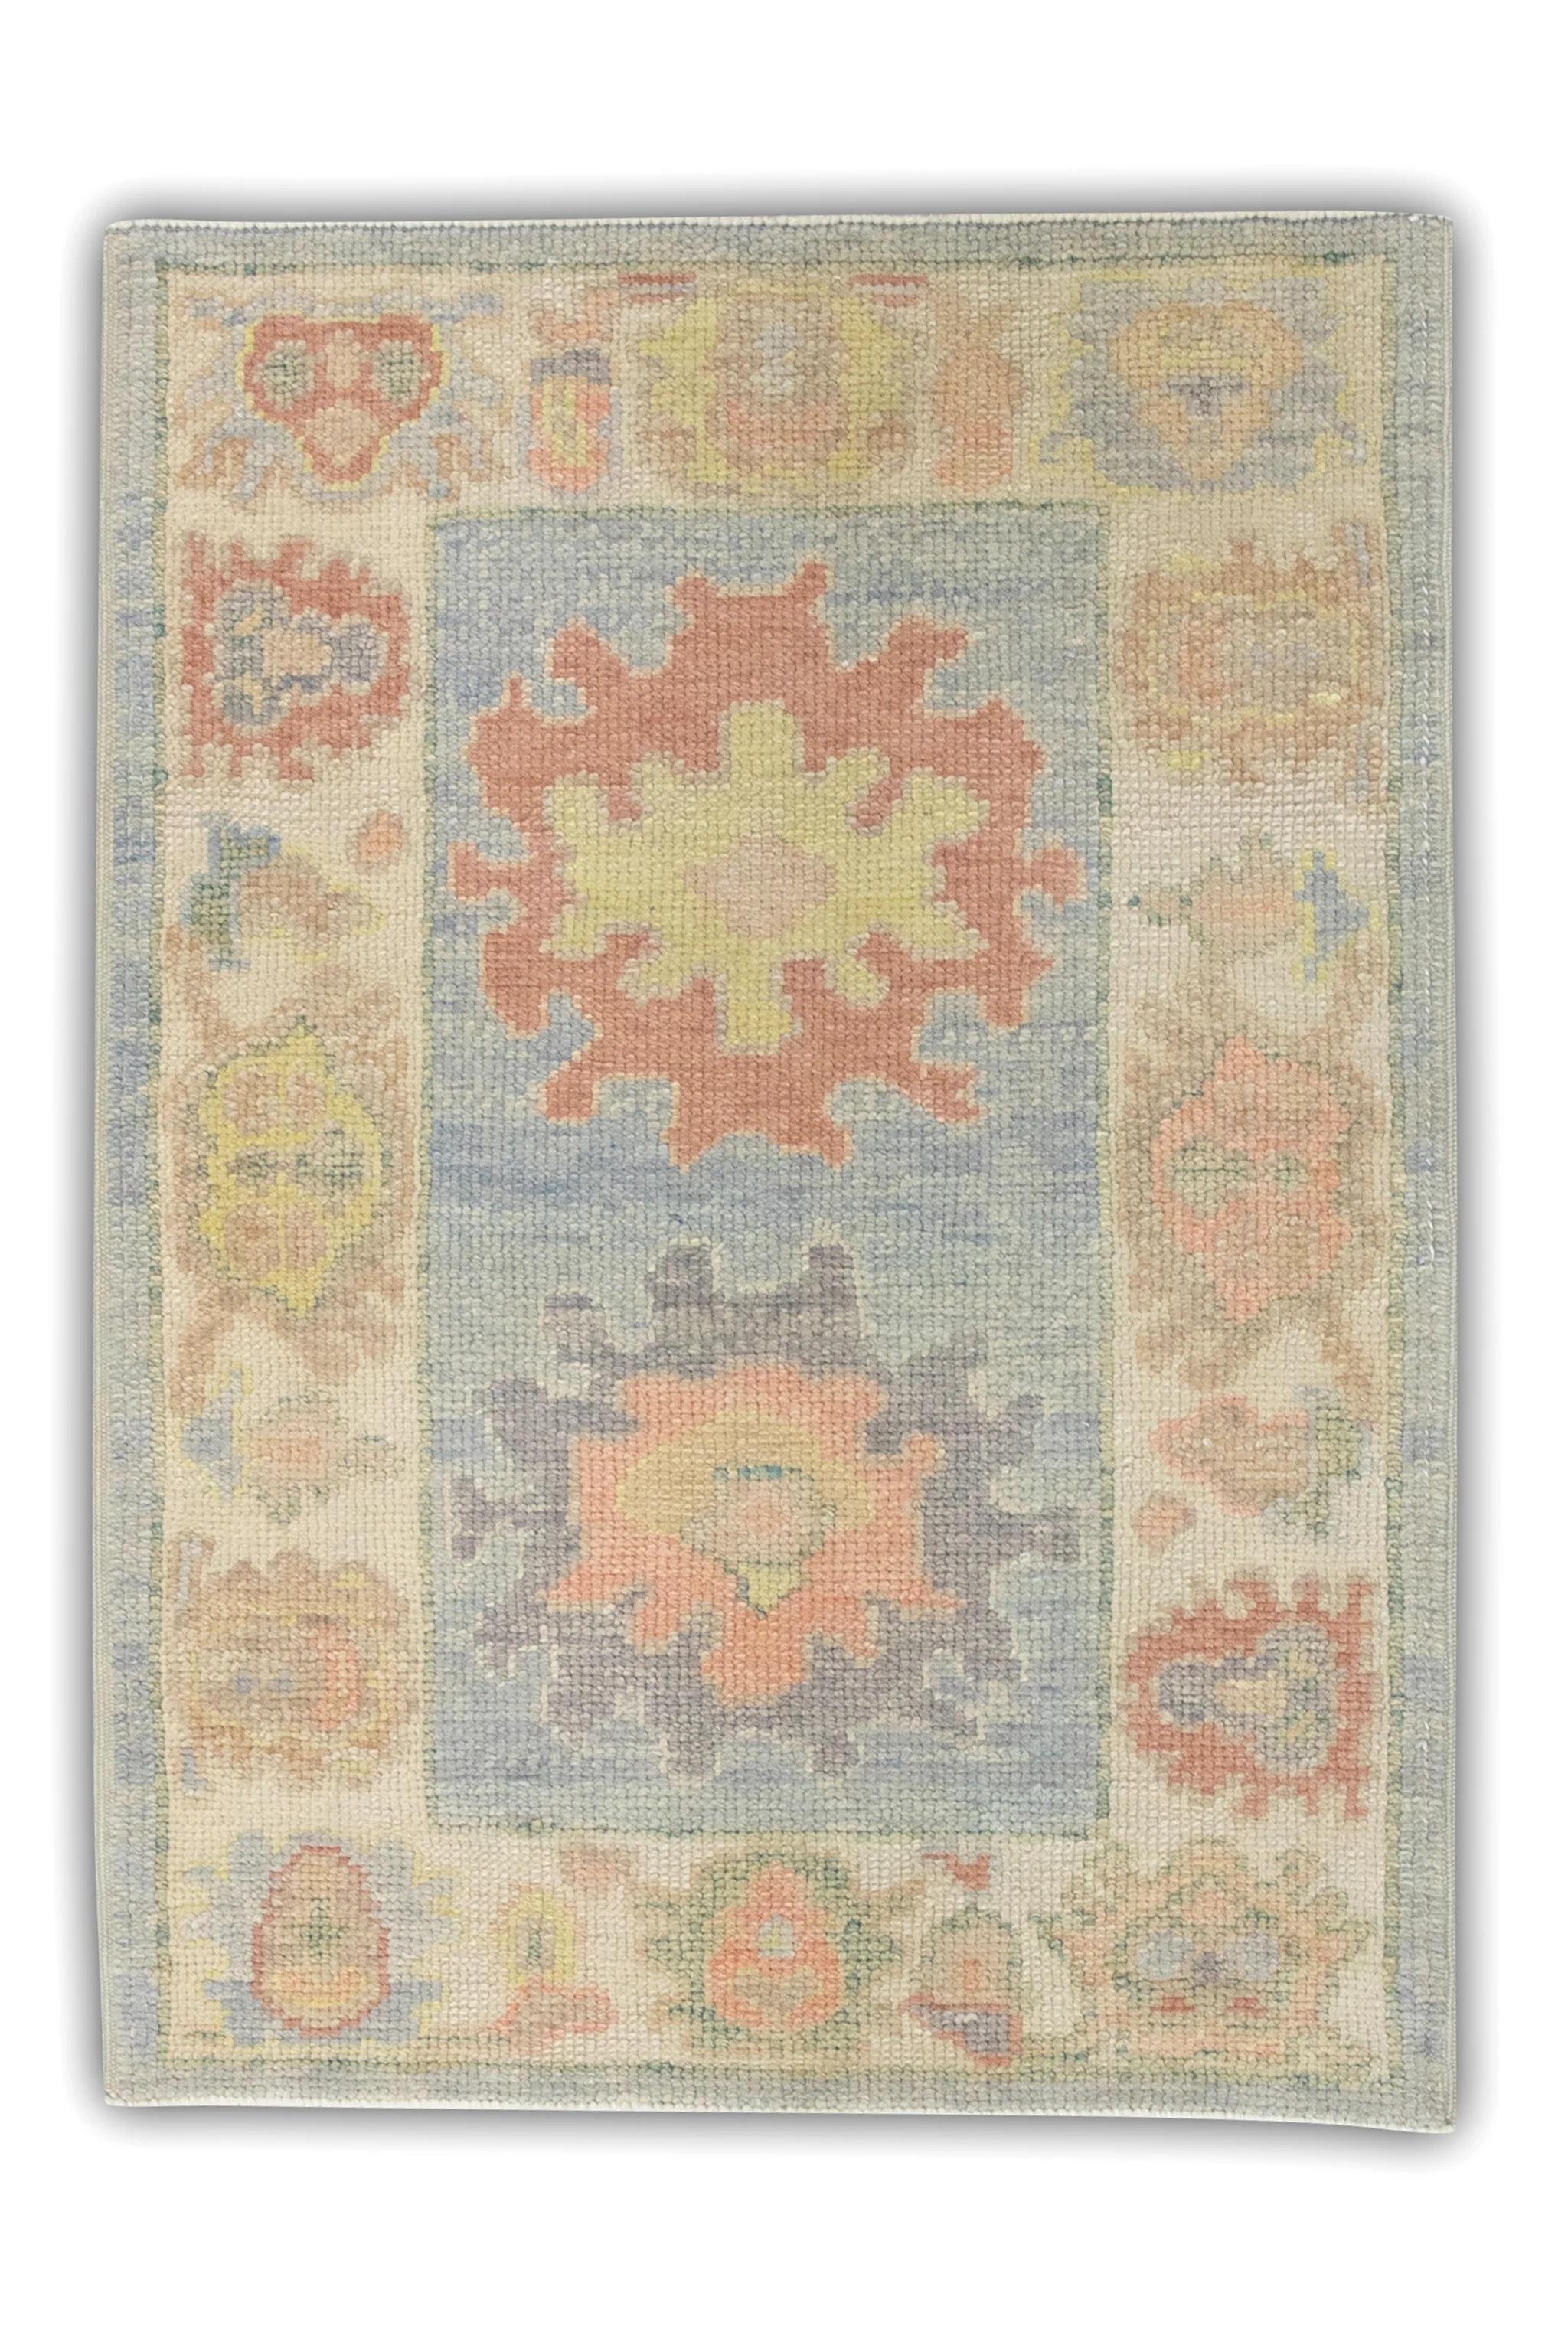 Contemporary Blue Multicolor Floral Design Handwoven Wool Turkish Oushak Rug 2'4